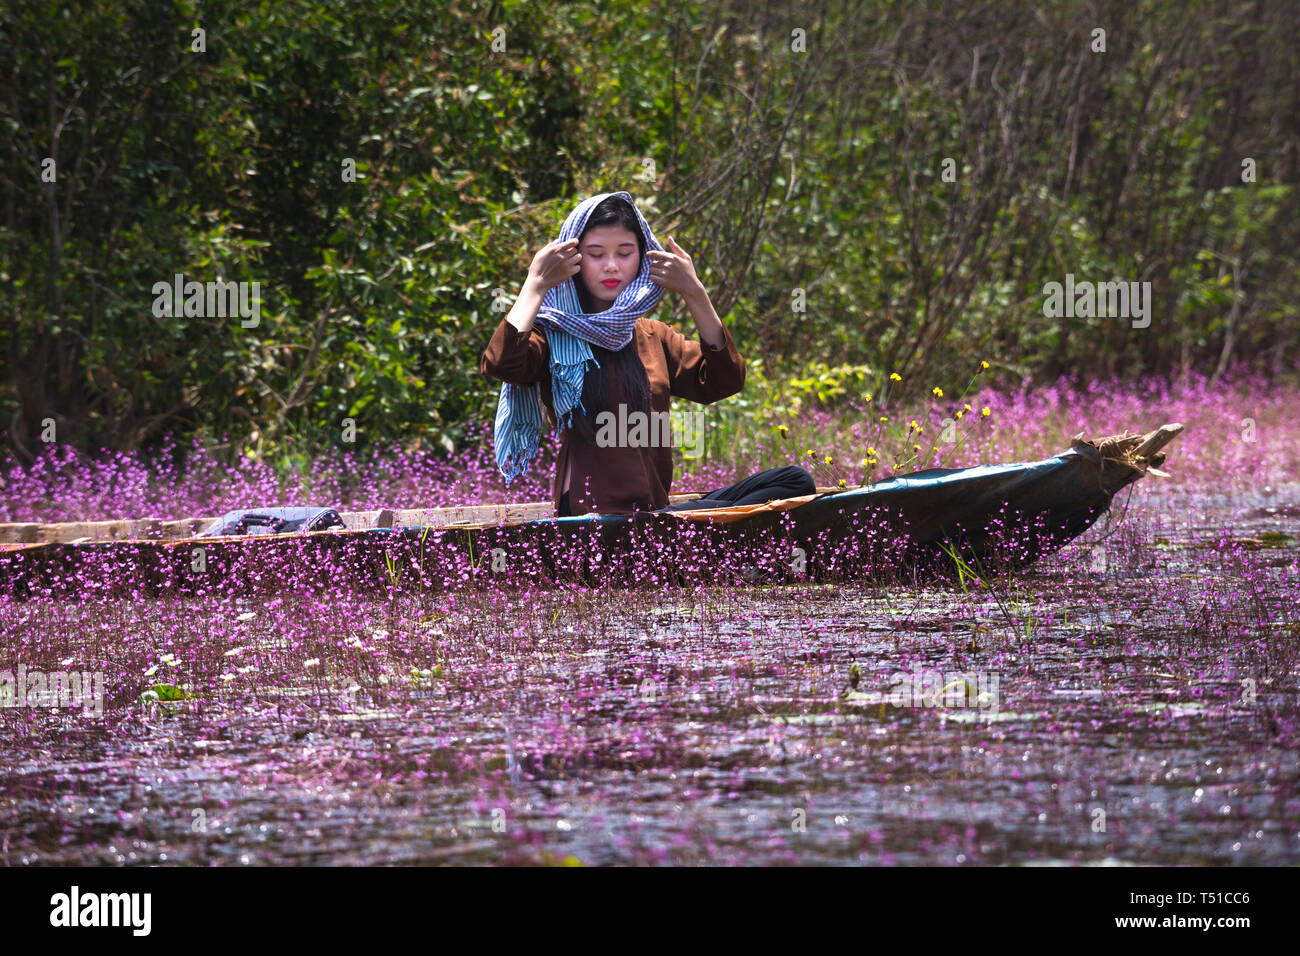 Tram Chim Nature Reserve, Dong Thap Province, Vietnam - March 18, 2017 : Image of a farmer happy couple are boating on a canal full of pink ultricular Stock Photo